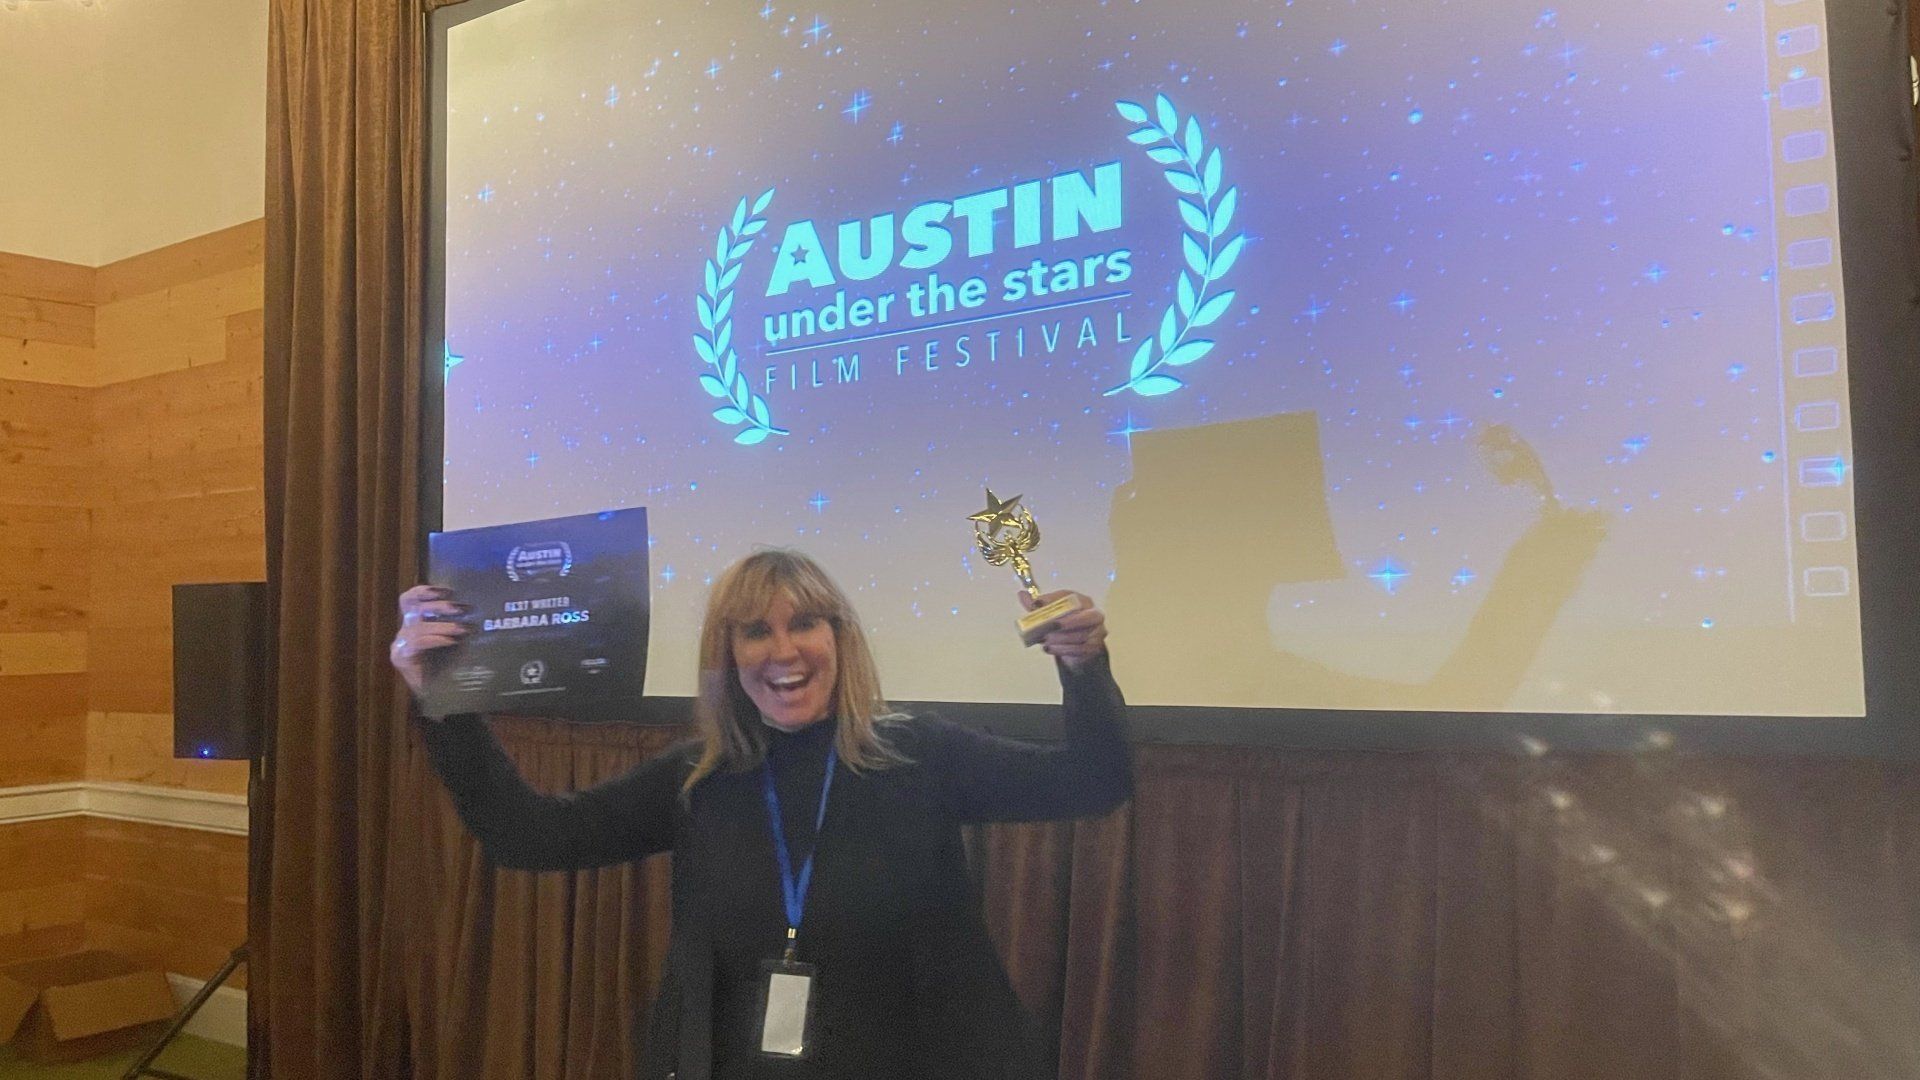 Barbara Ross is holding a trophy in front of a screen that says Austin Film Festival Under the Stars